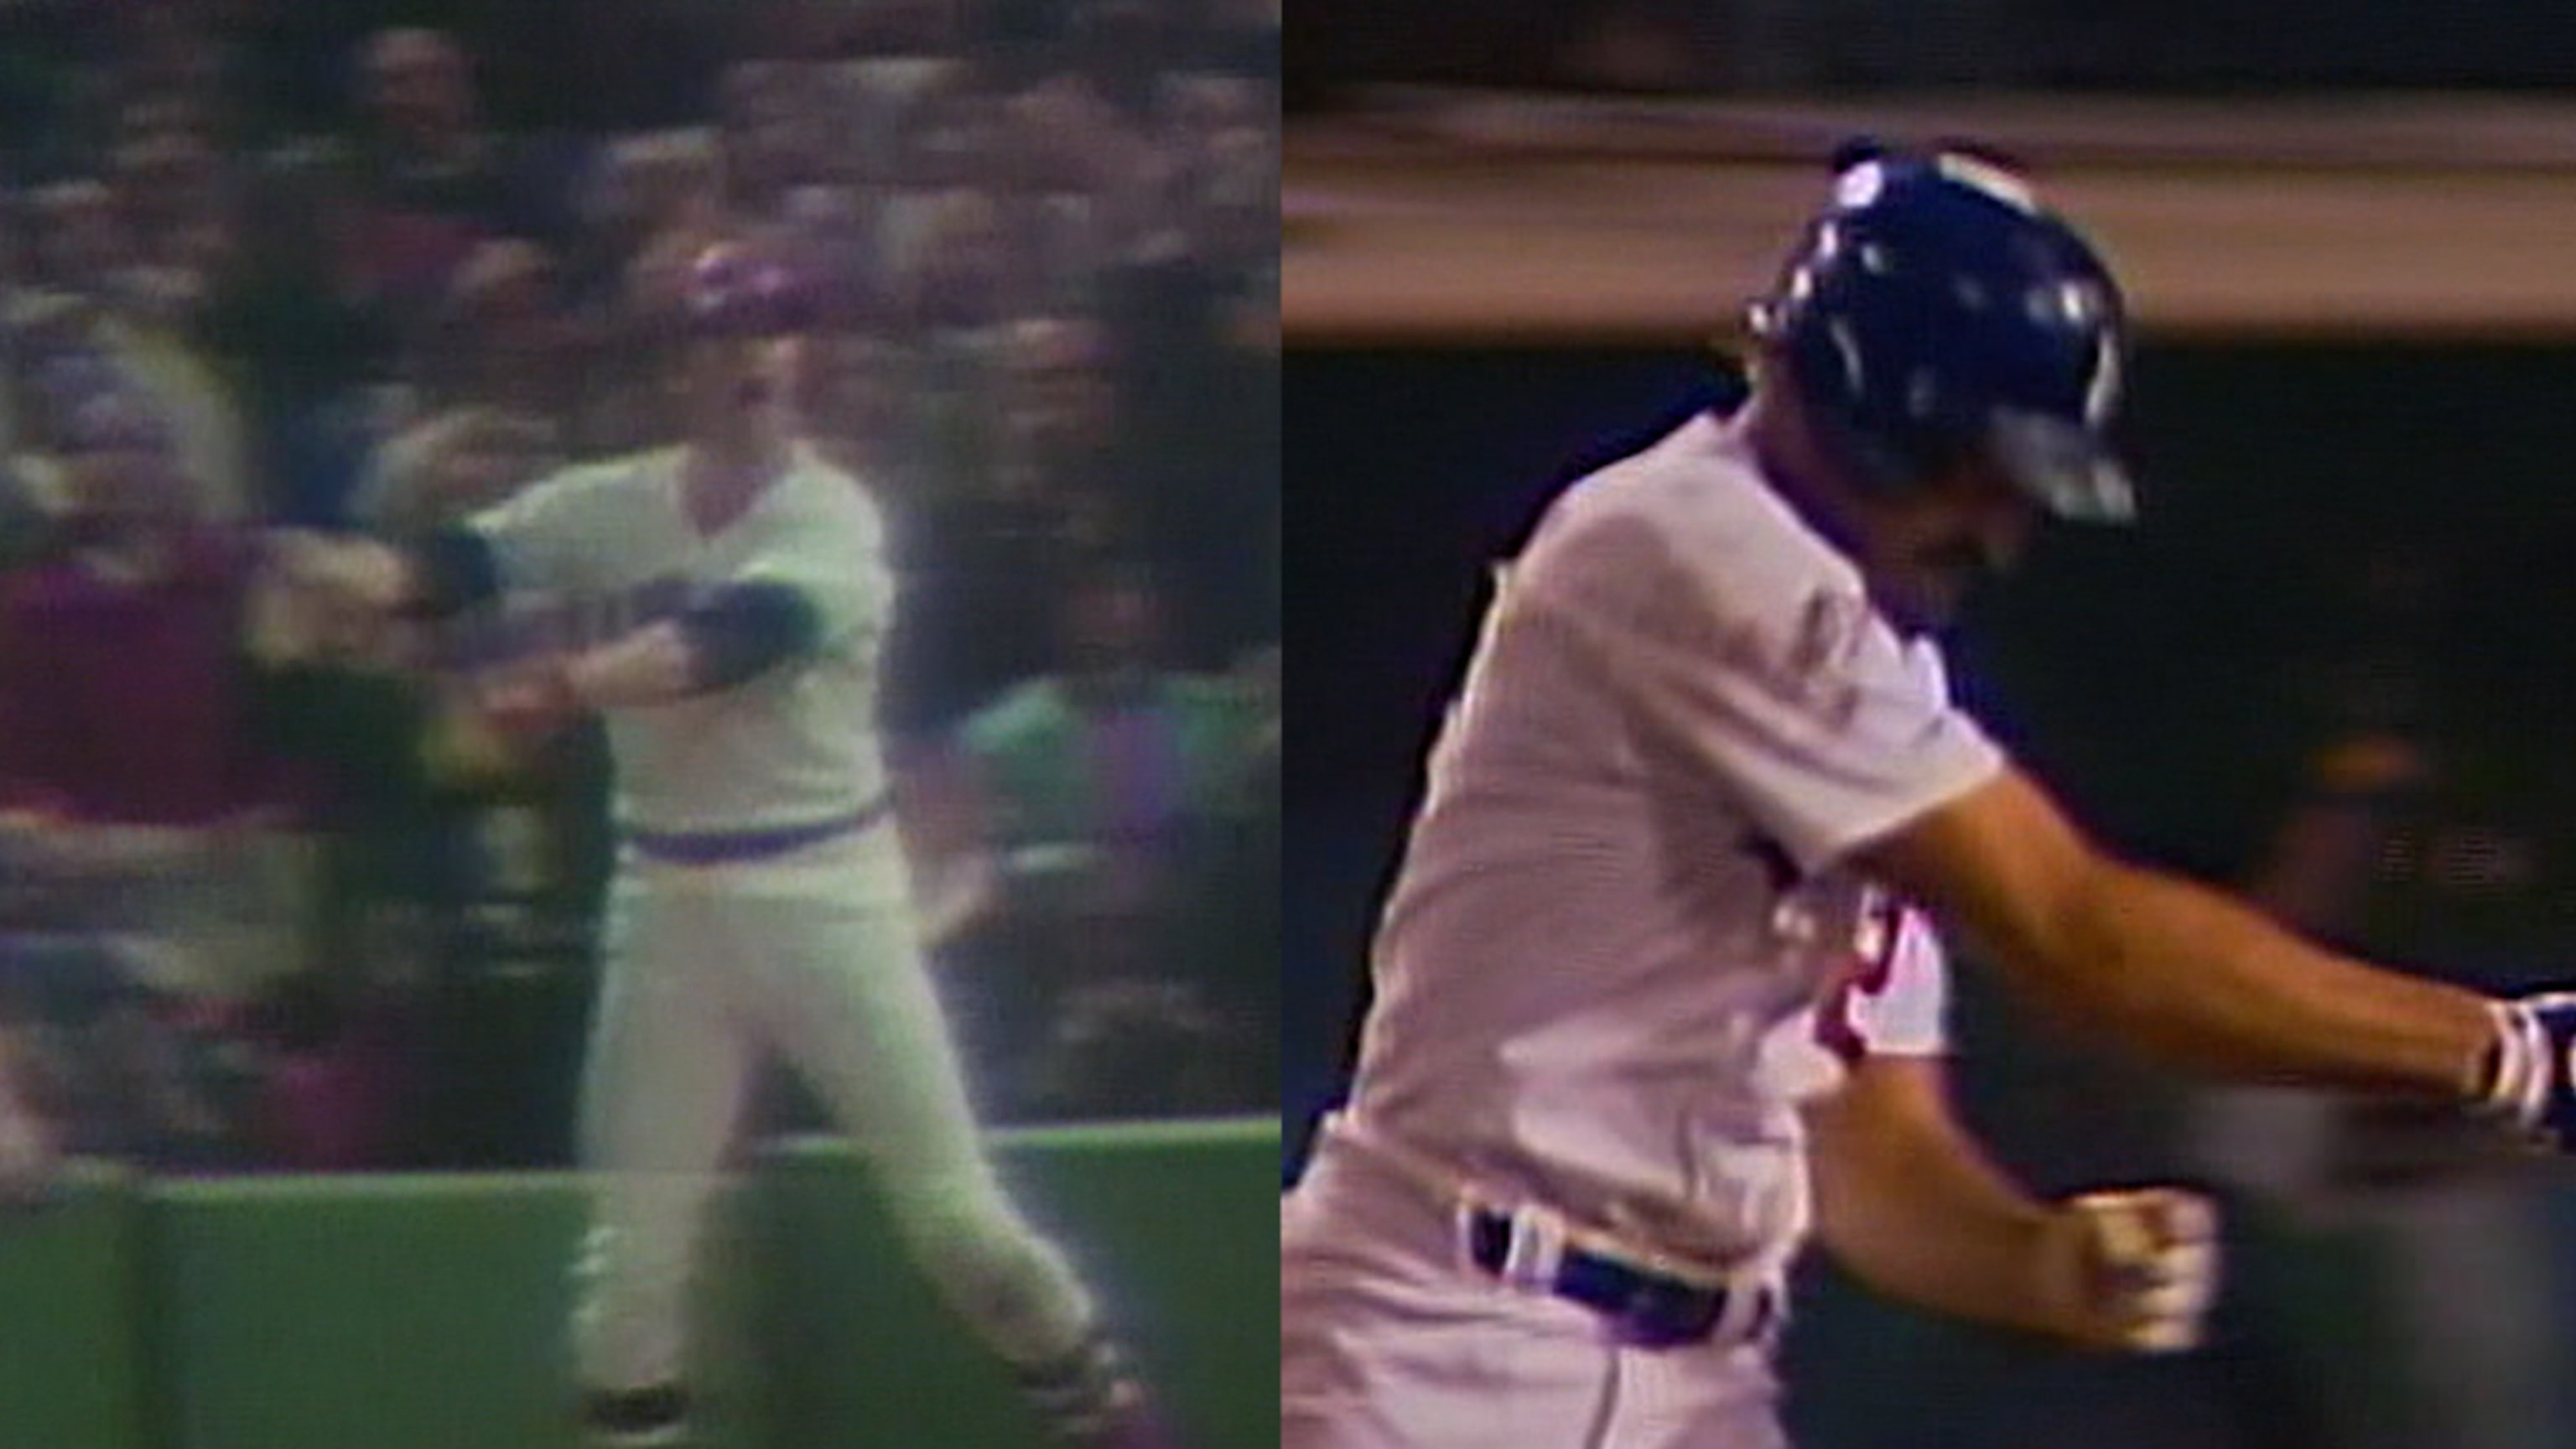 Kirk Gibson's Home Run Ball Is Still Gone, Probably Forever - The